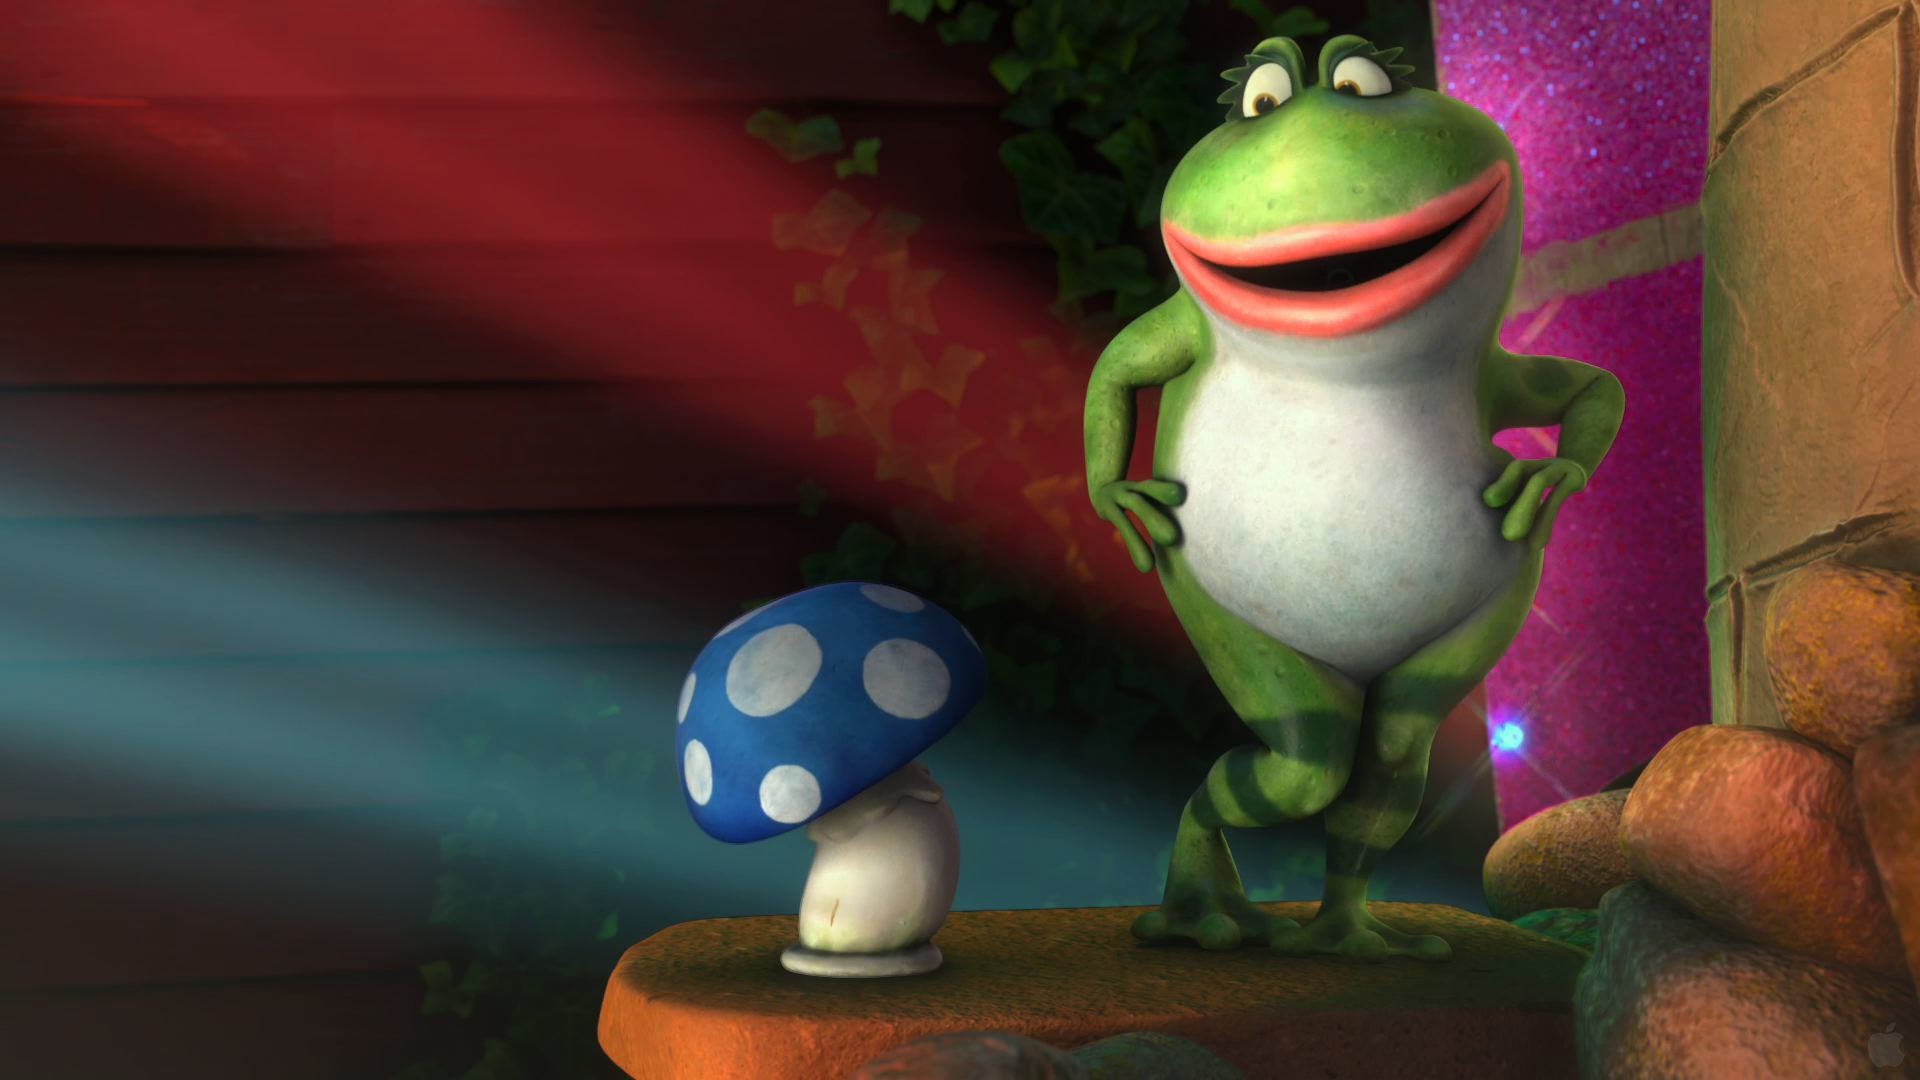 1920x1080 Nanette and Shroom from Disney's Gnomeo and Juliet movie wallpaper